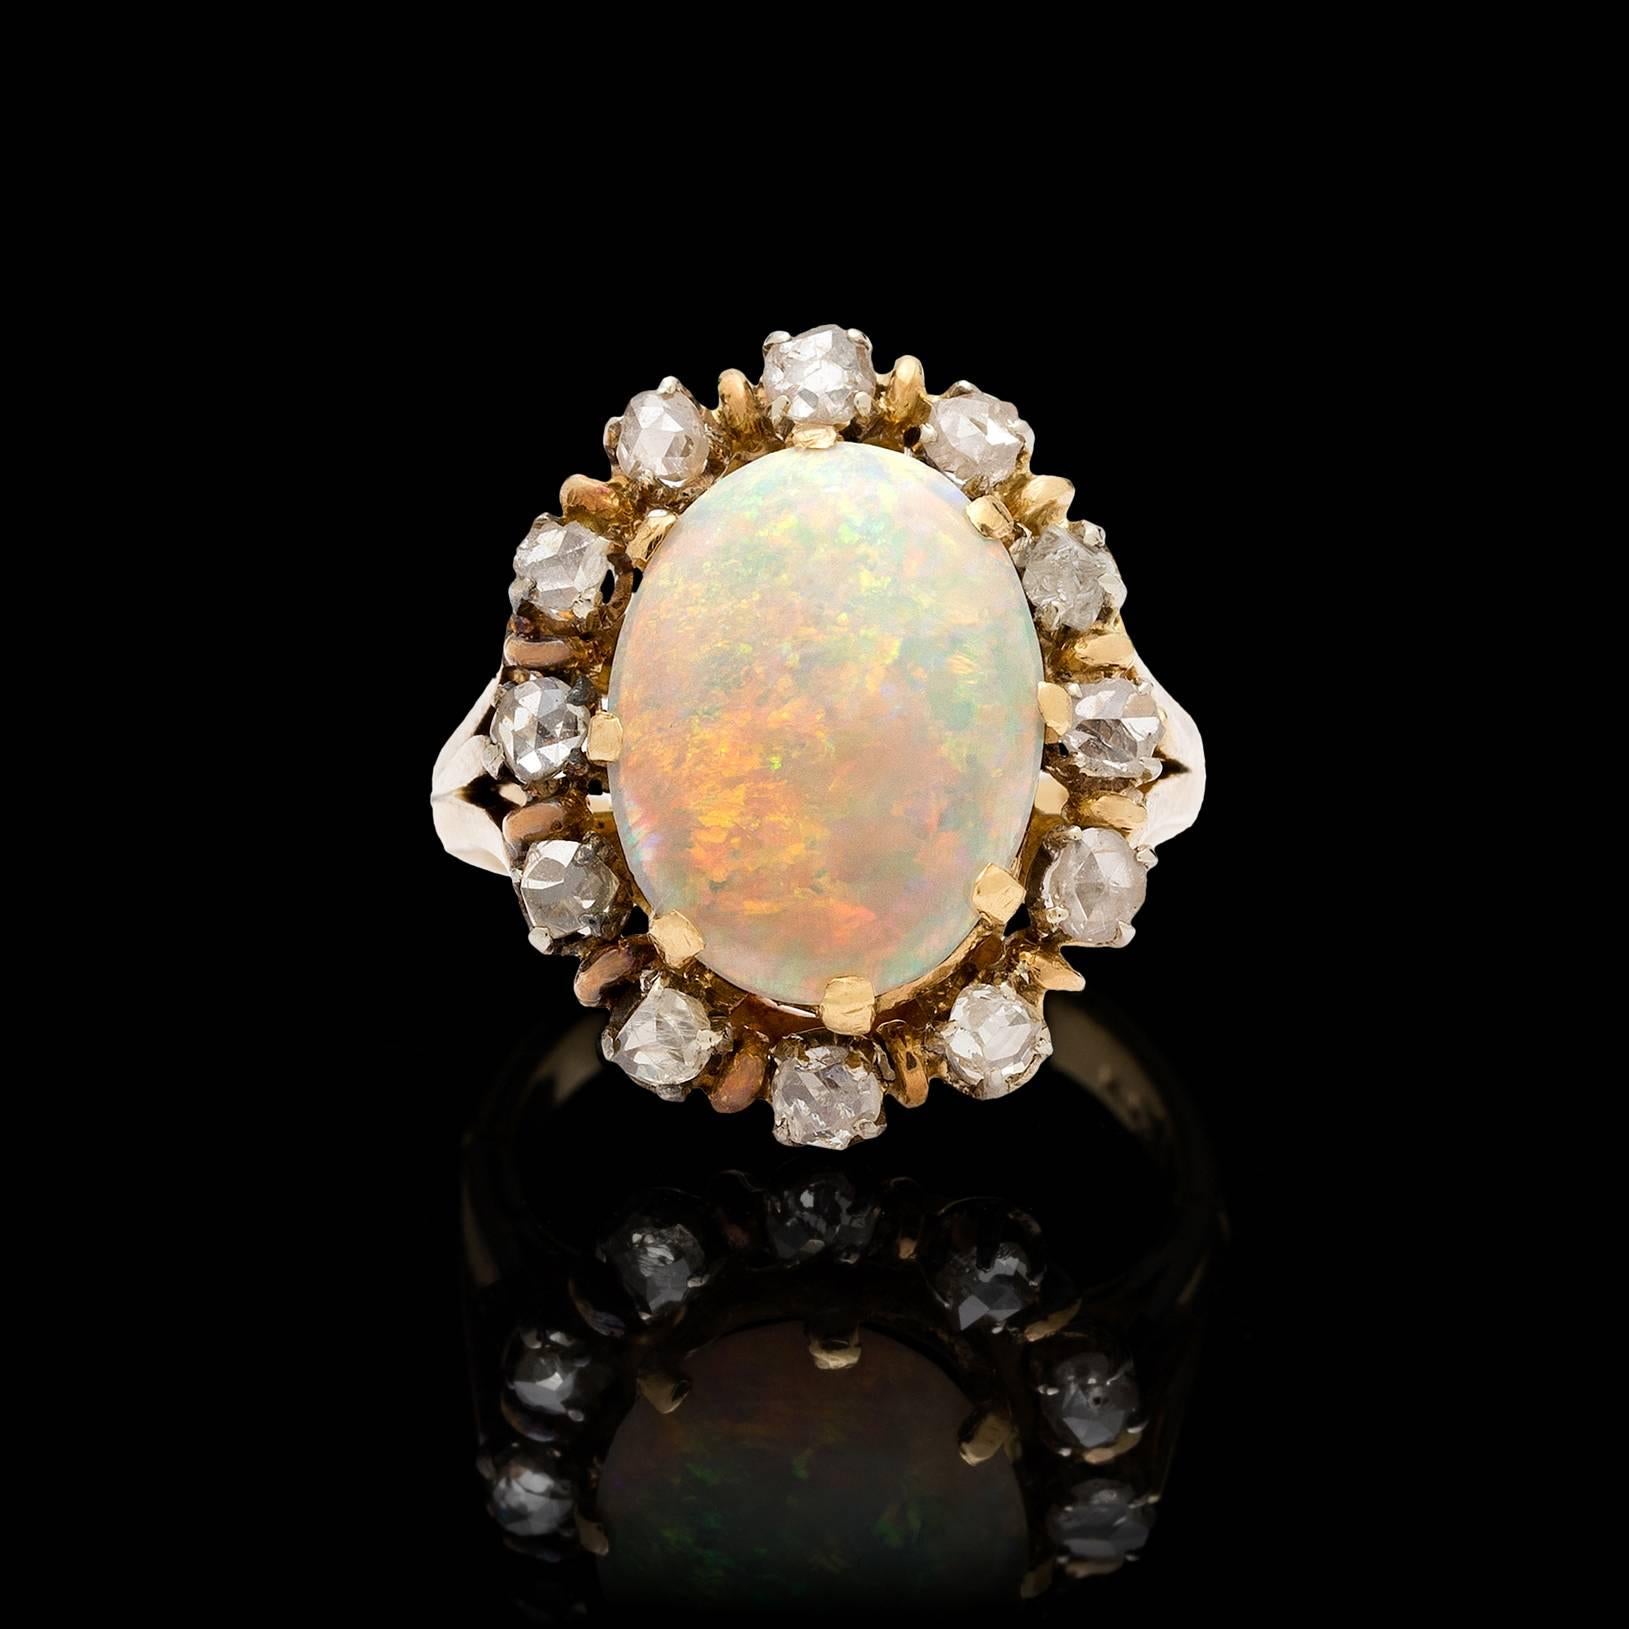 Vintage 18k yellow gold ring features a white opal with a play-of-color flashes of red, blue, & green in a pinfire pattern. The opal measures 13.5 x 10.5 x 3.4 mm. Surrounding the opal are 12 rose cut diamonds totaling approximately 0.50 carats.